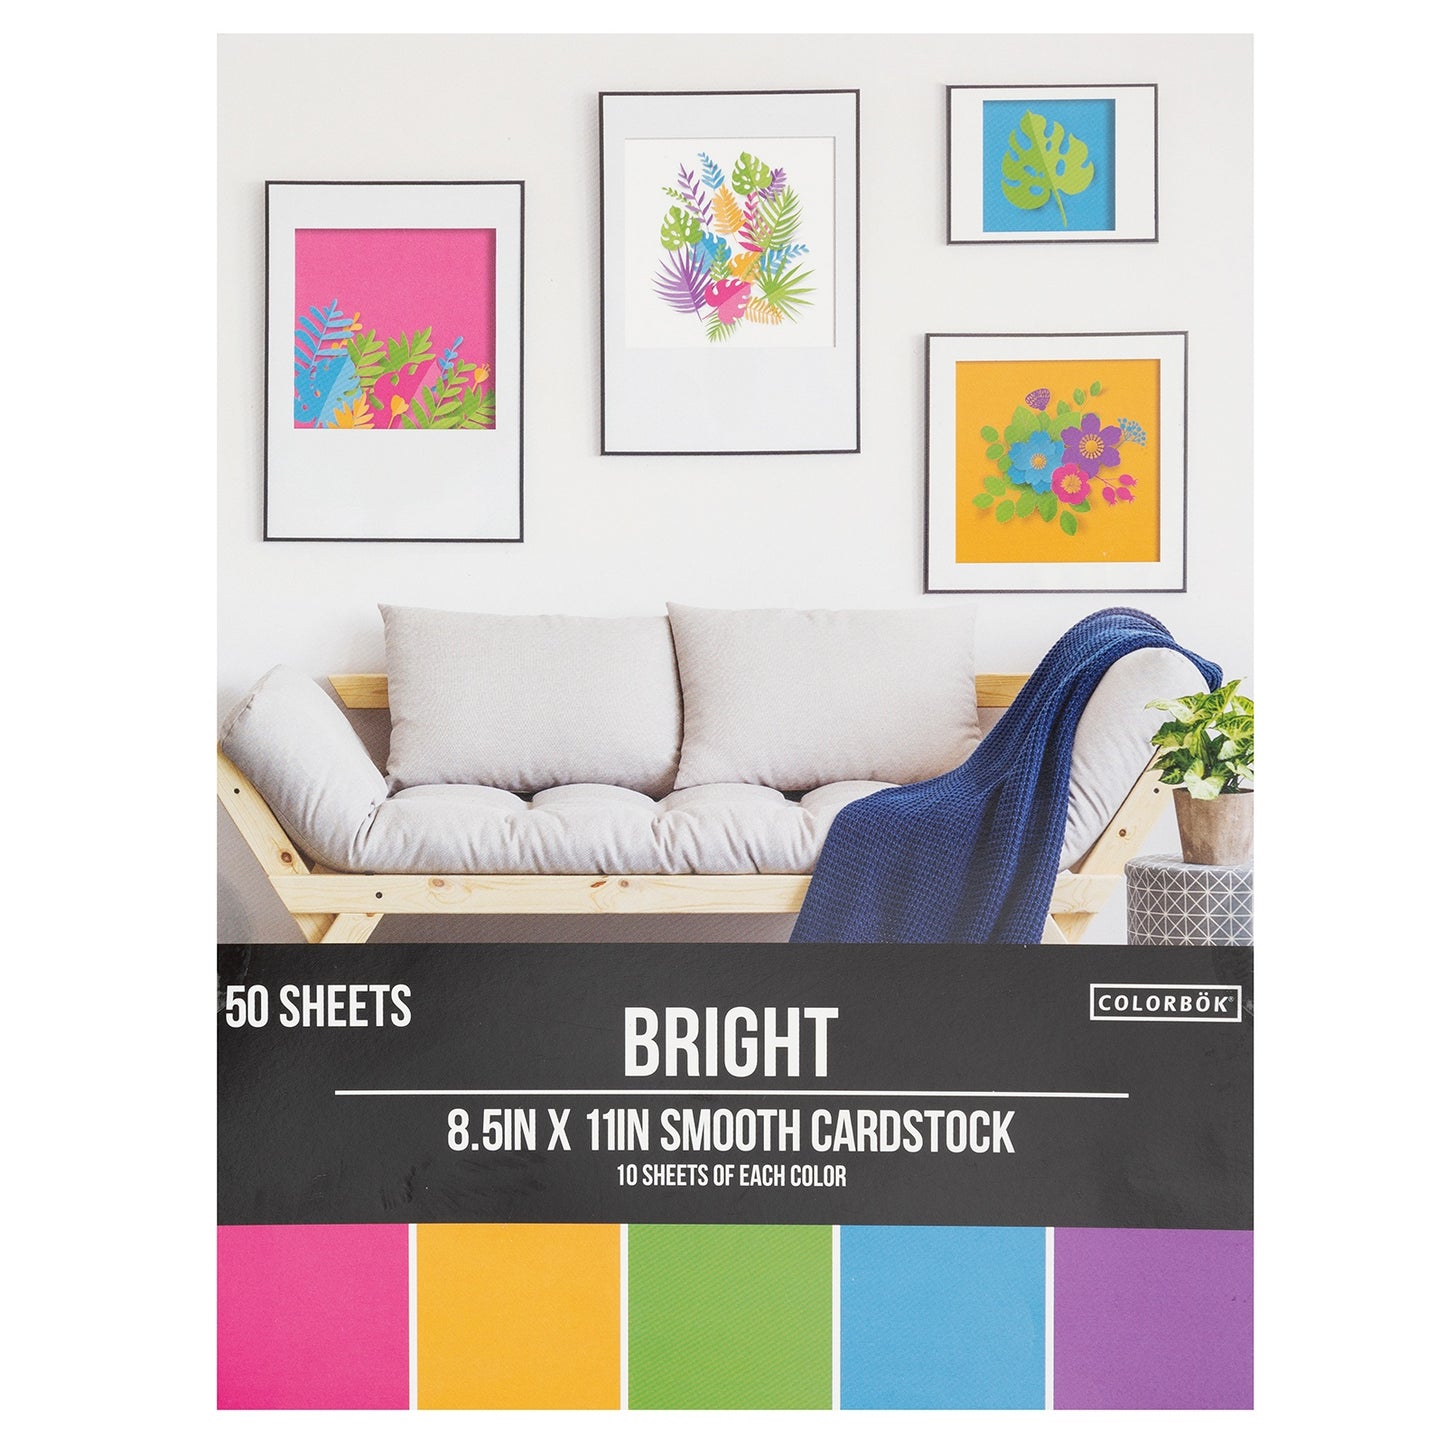 Colorbok 78lb Smooth Cardstock 8.5"X11" 50/Pkg-Bright, 5 Colors/10 Each